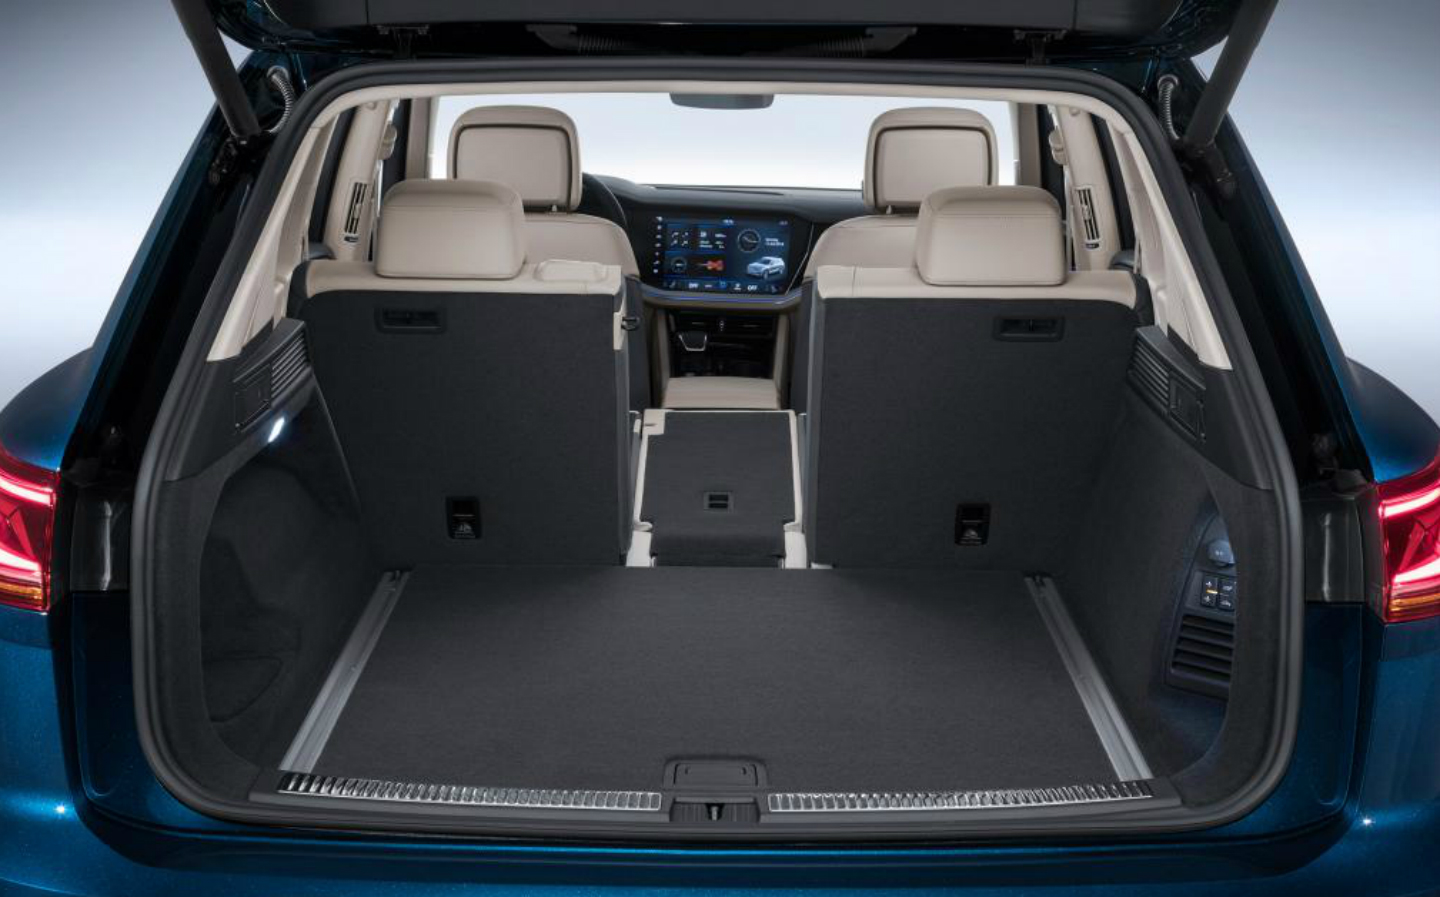 2018-VW-Touareg-interior-boot-space-is-now-810-litres